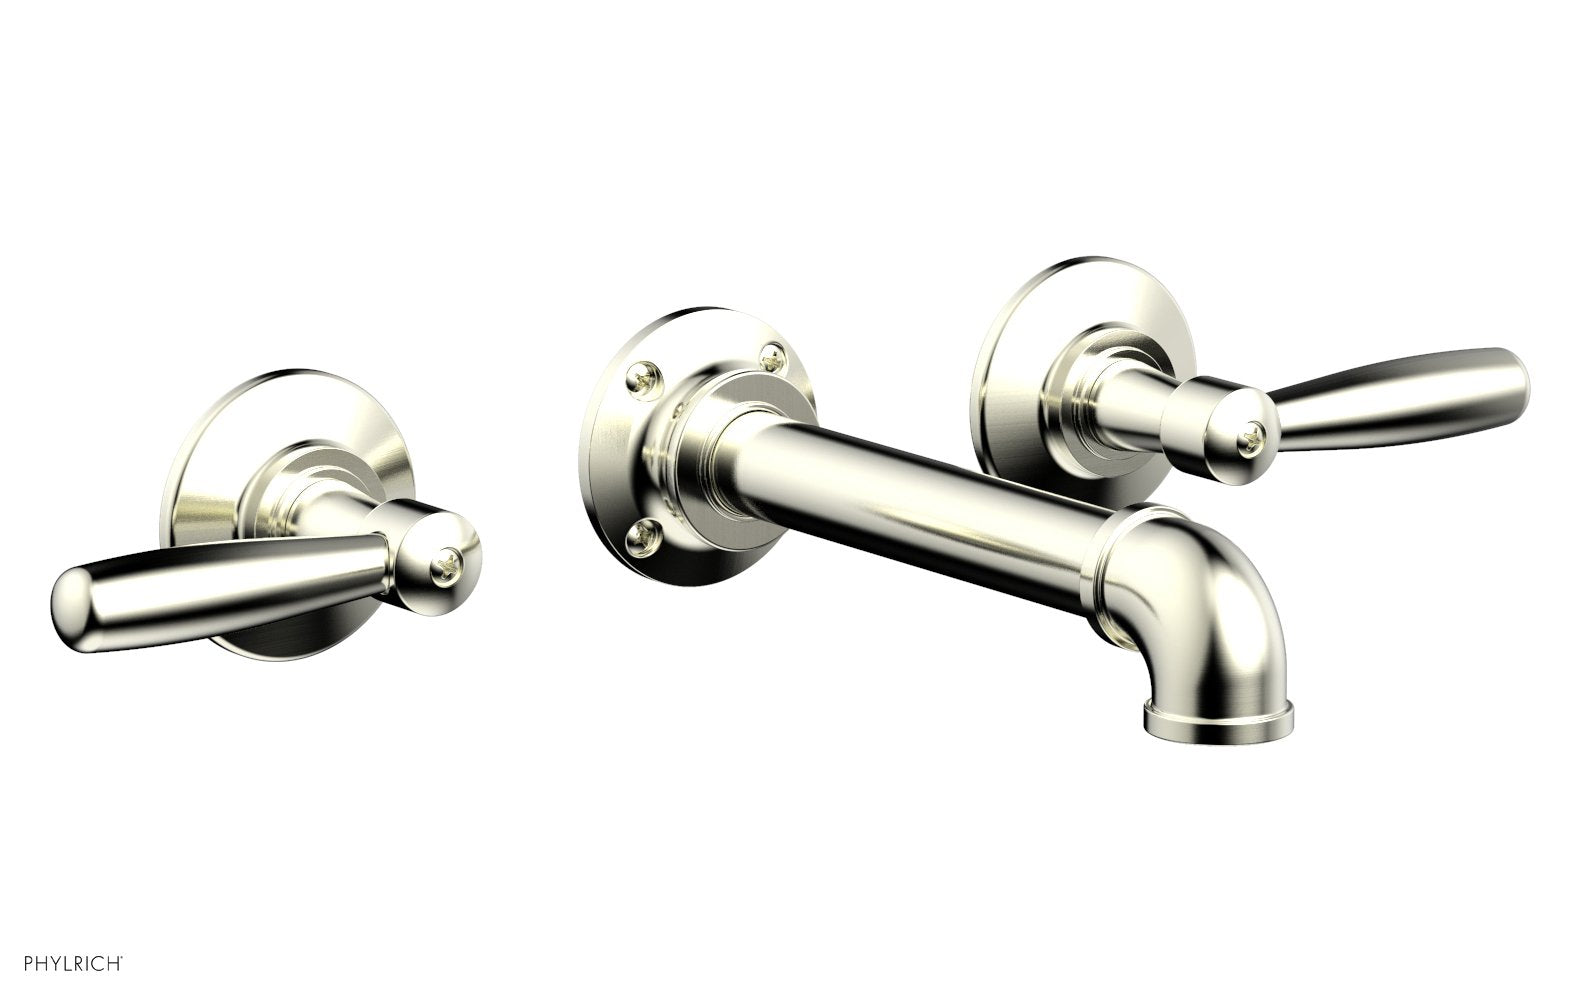 Phylrich WORKS 2 Wall Tub Set - Lever Handles